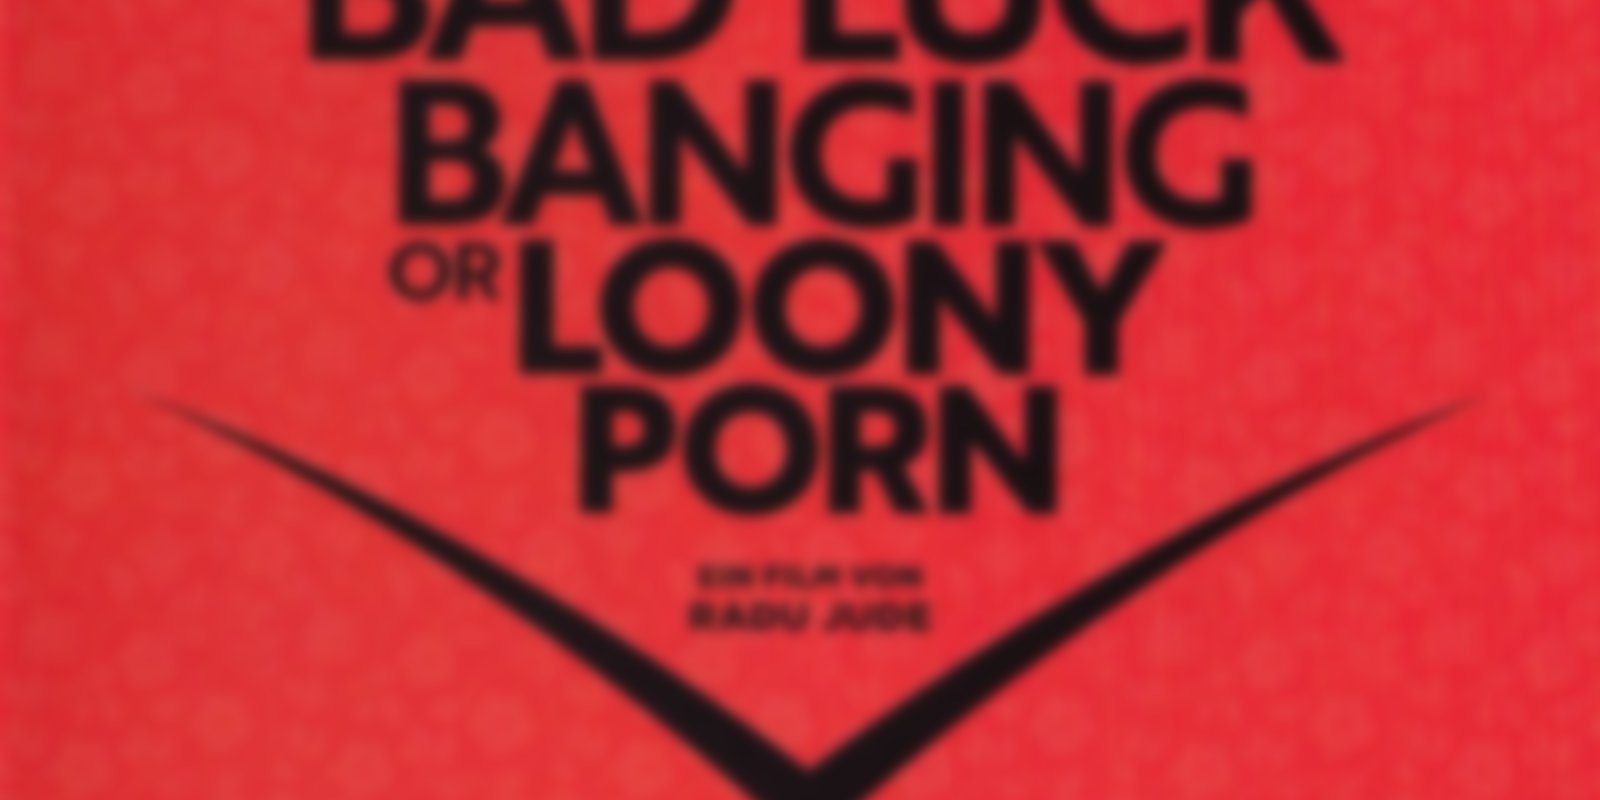 Sony Loony - Bad Luck Banging or Loony Porn: DVD, Blu-ray oder VoD leihen - VIDEOBUSTER